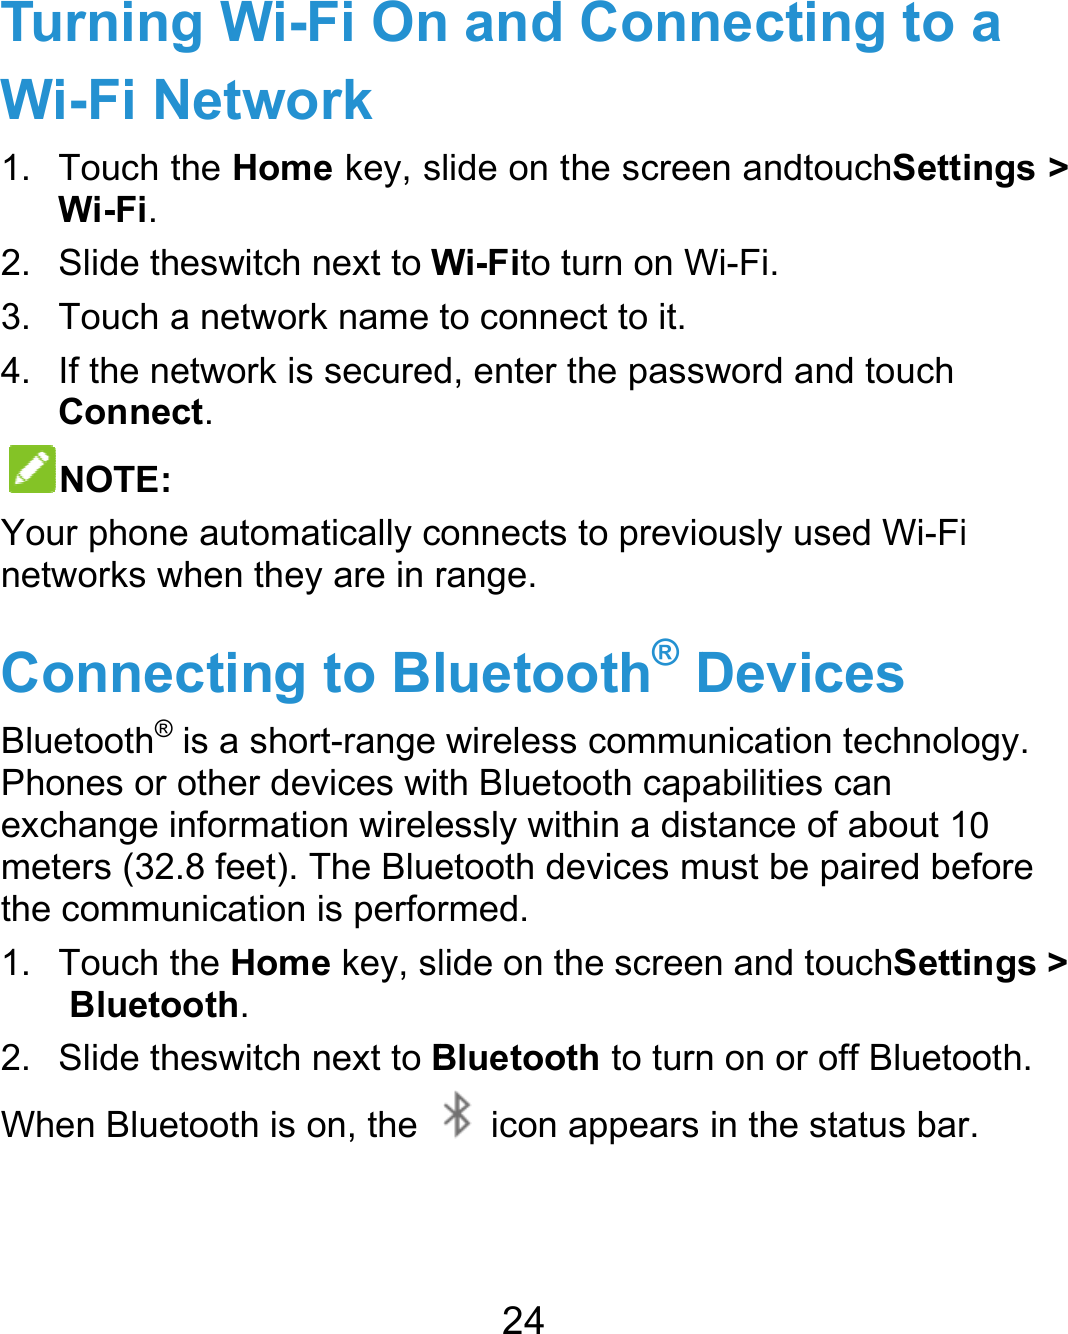  TurningWi-Fi N1. Touch tWi-Fi. 2. Slide th3. Touch a4.  If the neConnecNOTE: Your phonenetworks wConnecBluetooth® Phones or oexchange imeters (32.the commu1. Touch tBlueto2. Slide thWhen Blueg Wi-Fi OnNetwork the Home key, seswitch next to Wa network name tetwork is securedct.  e automatically cwhen they are in rcting to Blis a short-range other devices witnformation wirele.8 feet). The Bluenication is perforhe Home key, slooth. eswitch next to Btooth is on, the 24 n and Connlide on the screeWi-Fito turn on Wto connect to it.d, enter the passonnects to previorange. luetooth® Dwireless commuth Bluetooth capessly within a disetooth devices mrmed. lide on the screeBluetooth to turn icon appearsnecting to en andtouchSettWi-Fi.  sword and touch ously used Wi-FiDevices unication technoloabilities can stance of about 1must be paired been and touchSettn on or off Bluetoin the status bara ings &gt; i ogy. 0 efore ings &gt; ooth. r.  